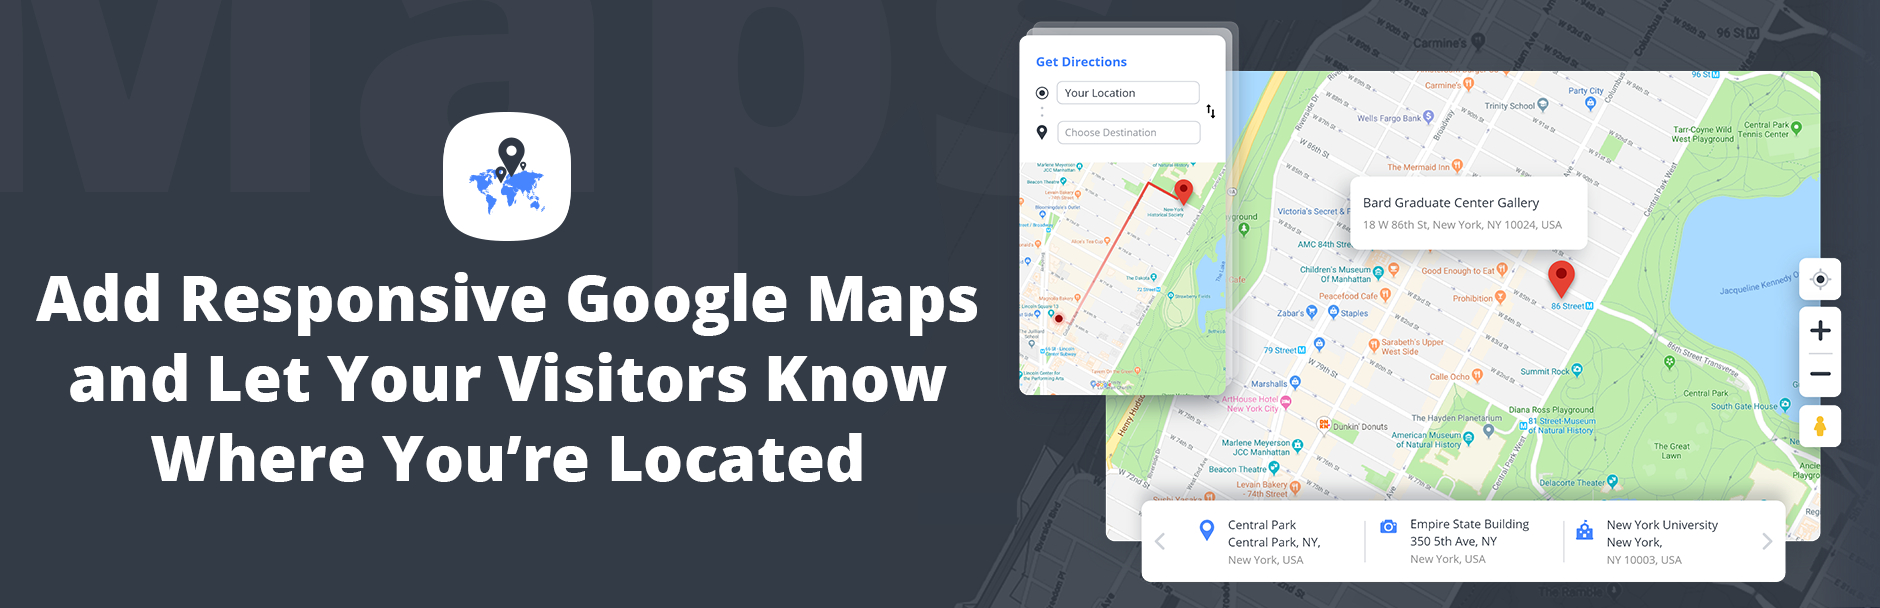 Product image for 10Web Map Builder for Google Maps.